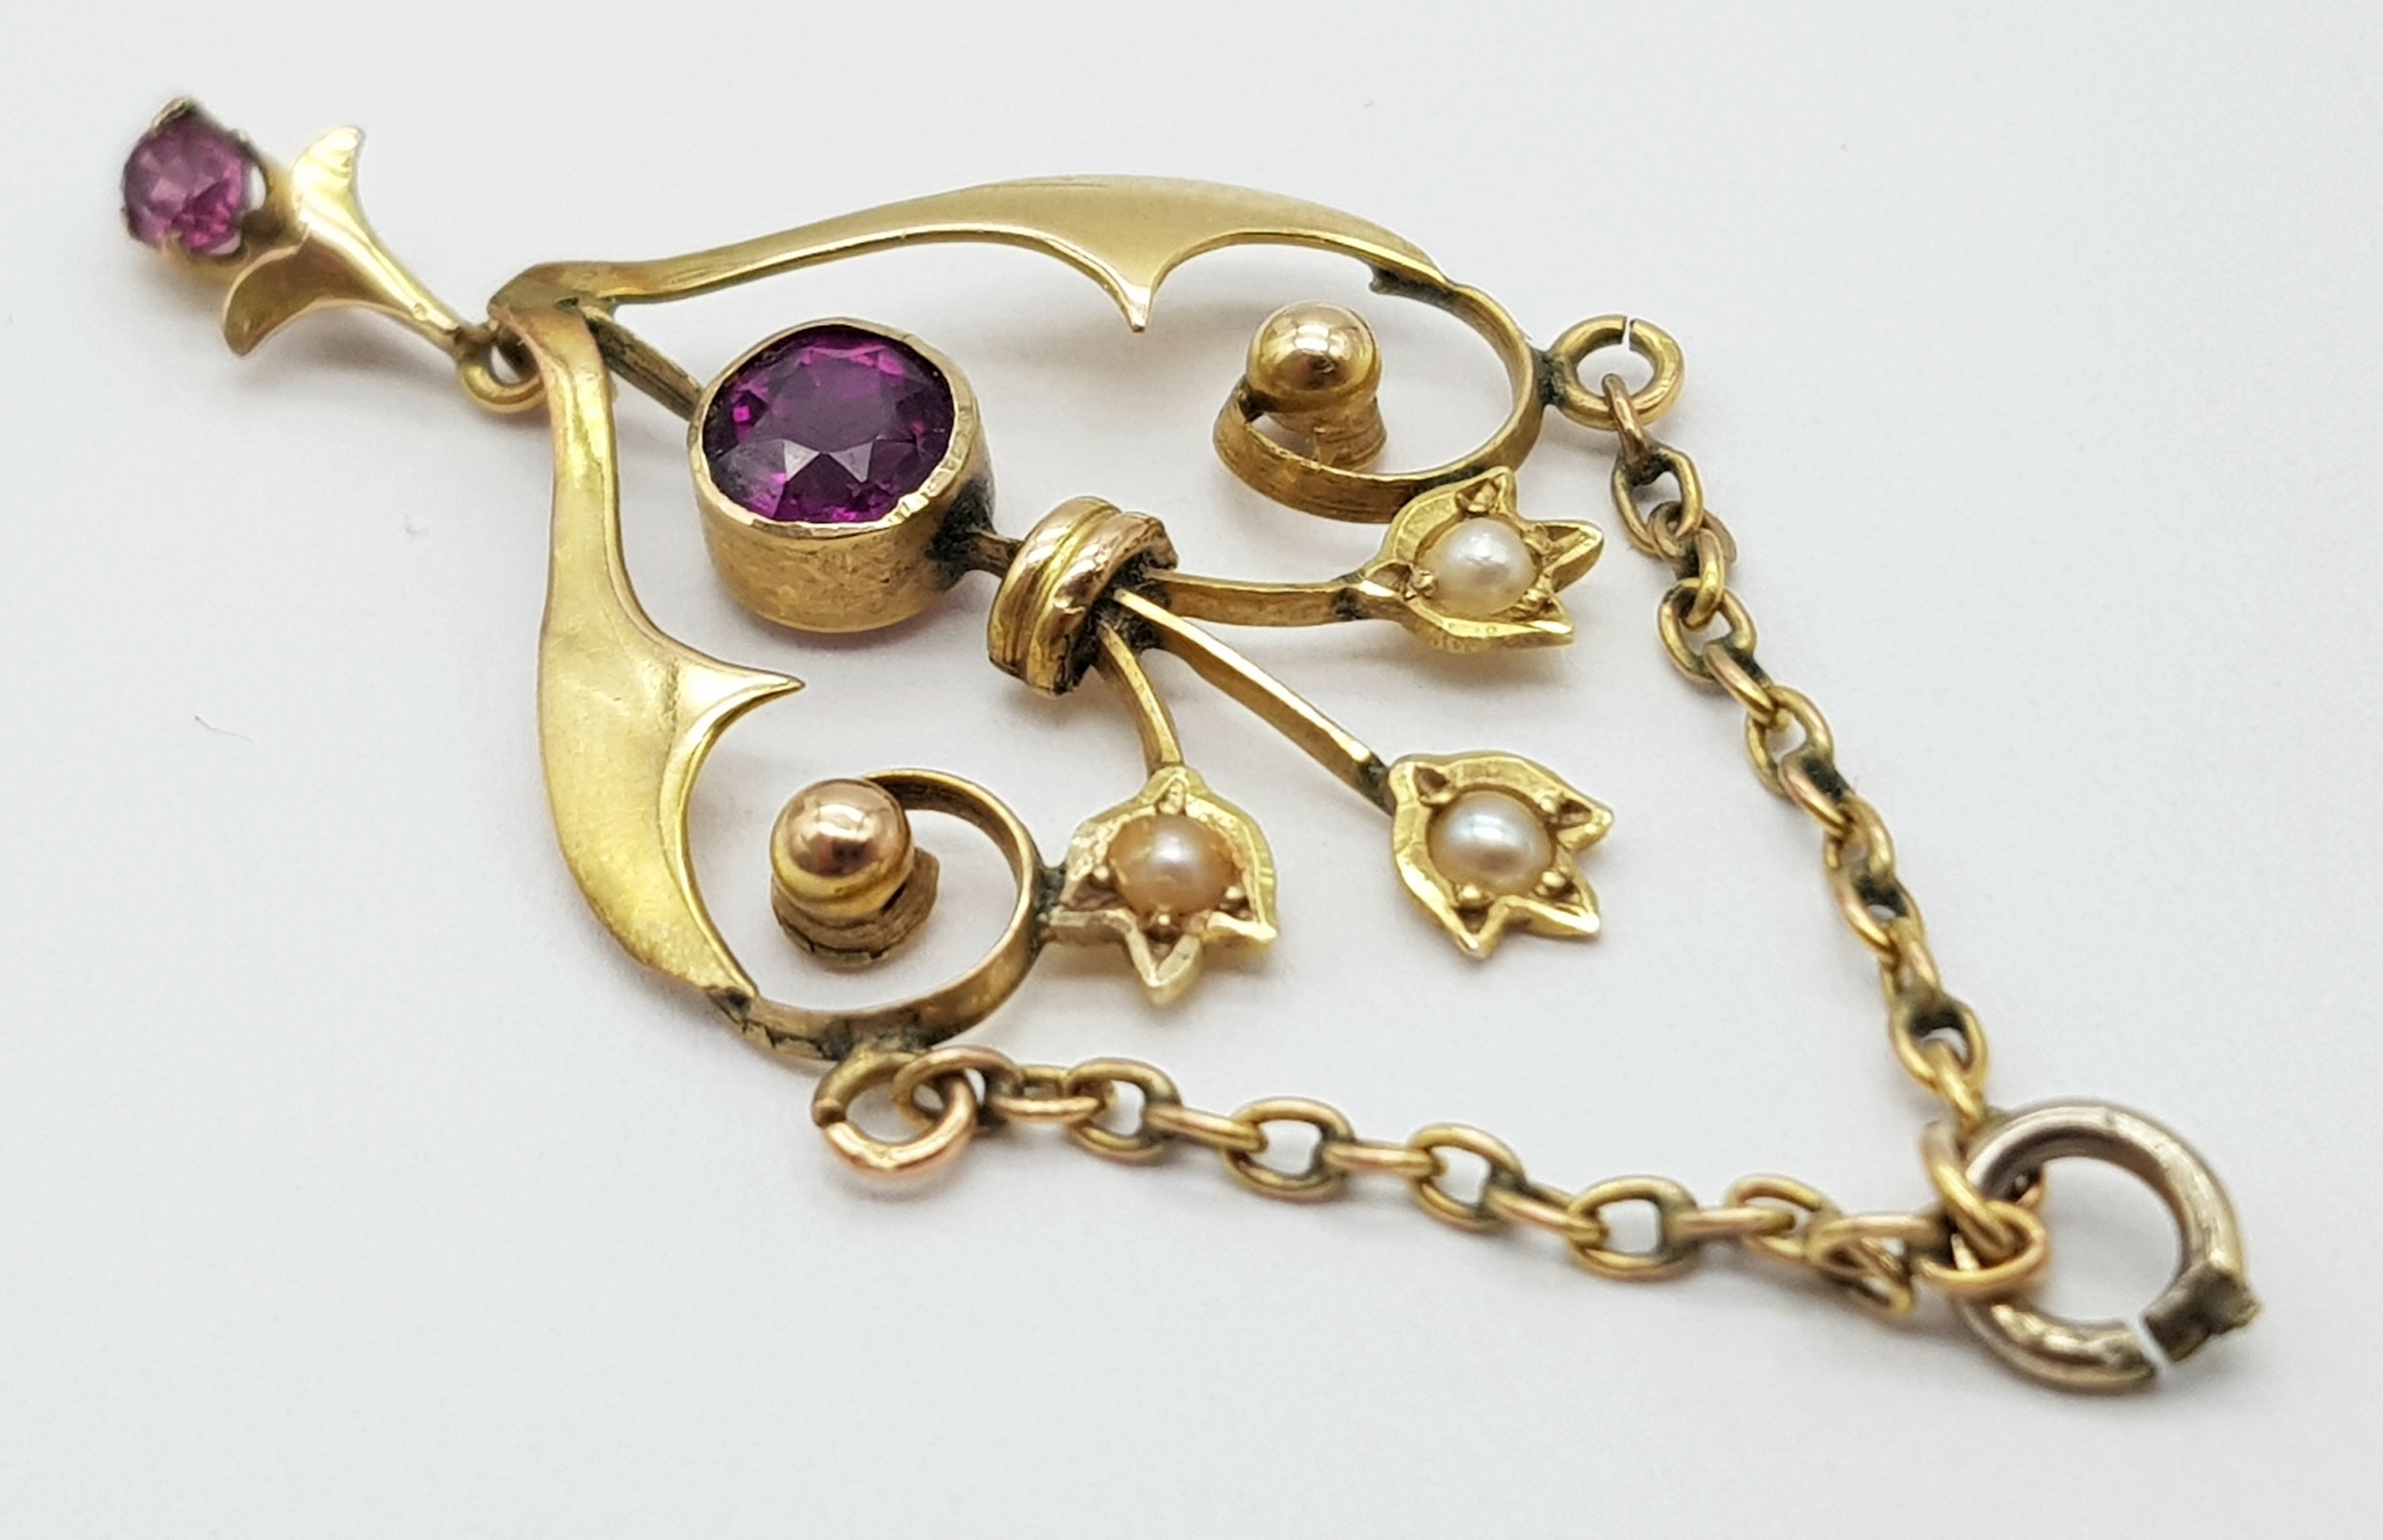 An Antique 9K Yellow Gold Amethyst and Seed Pearl Pendant. Beautiful floral design. 5cm. 1.8g - Image 4 of 5